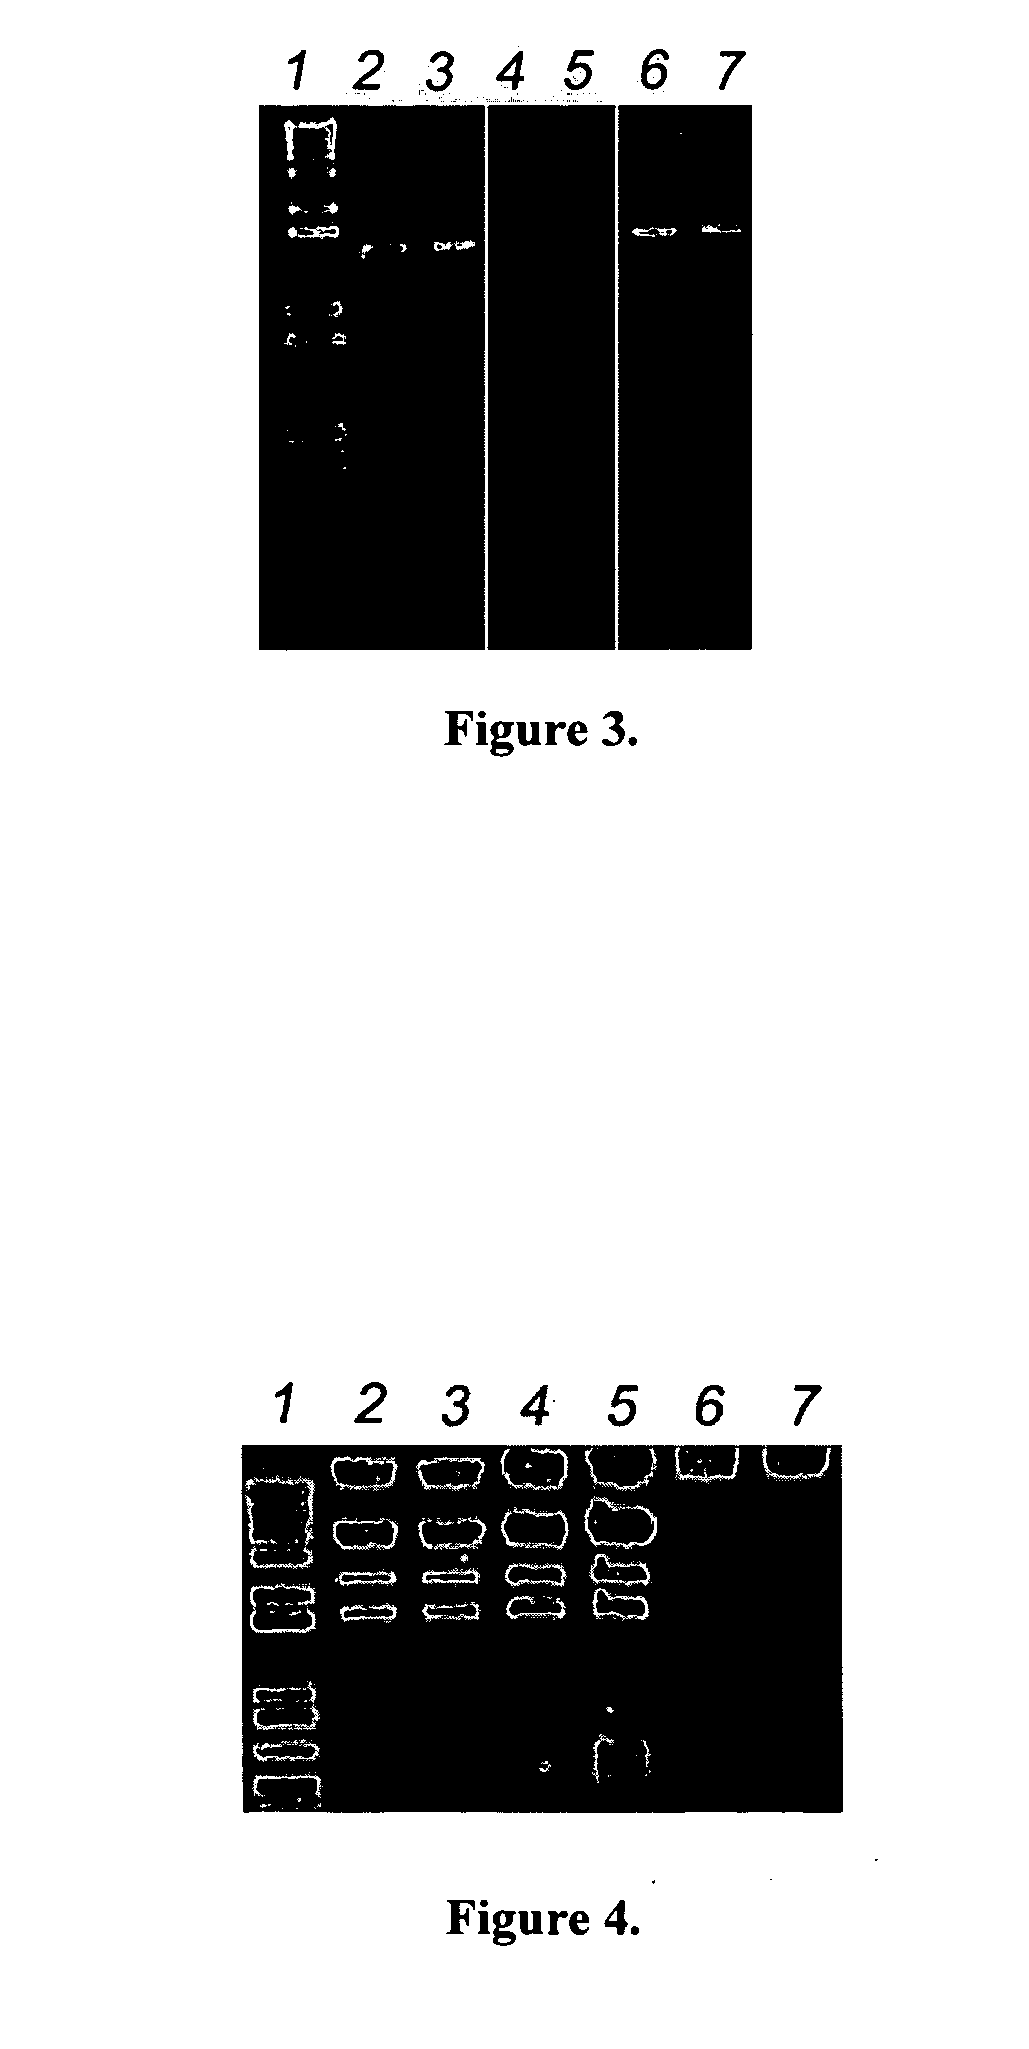 Purification methods and uses thereof